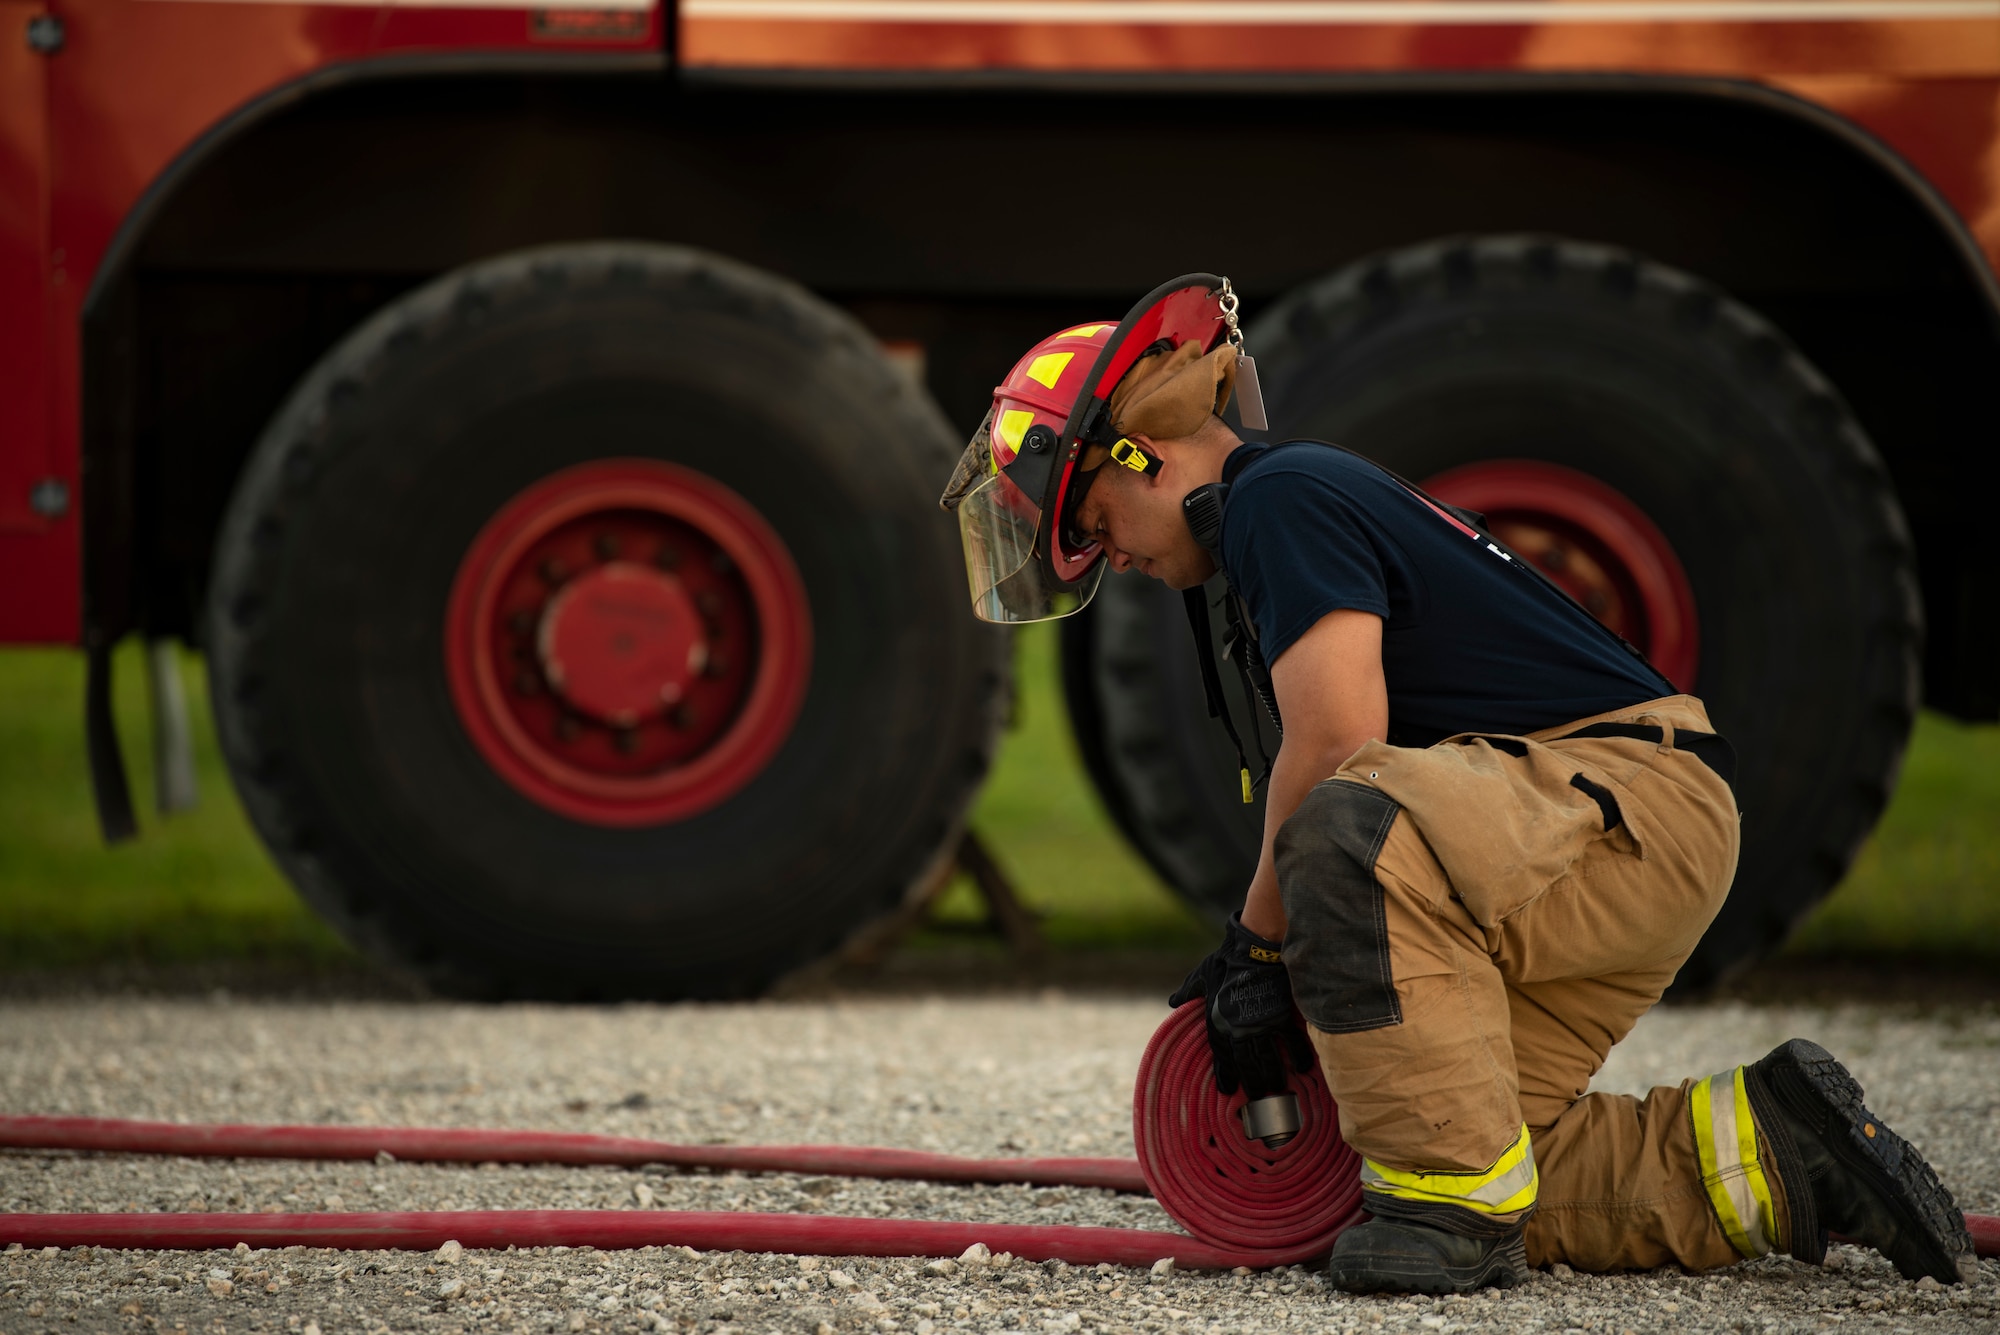 U.S. Air Force firefighter assigned to the 36th Civil Engineer Squadron, rolls up a fire hose during joint aircraft fire training at Andersen Air Force Base, Guam, May 11, 2021.